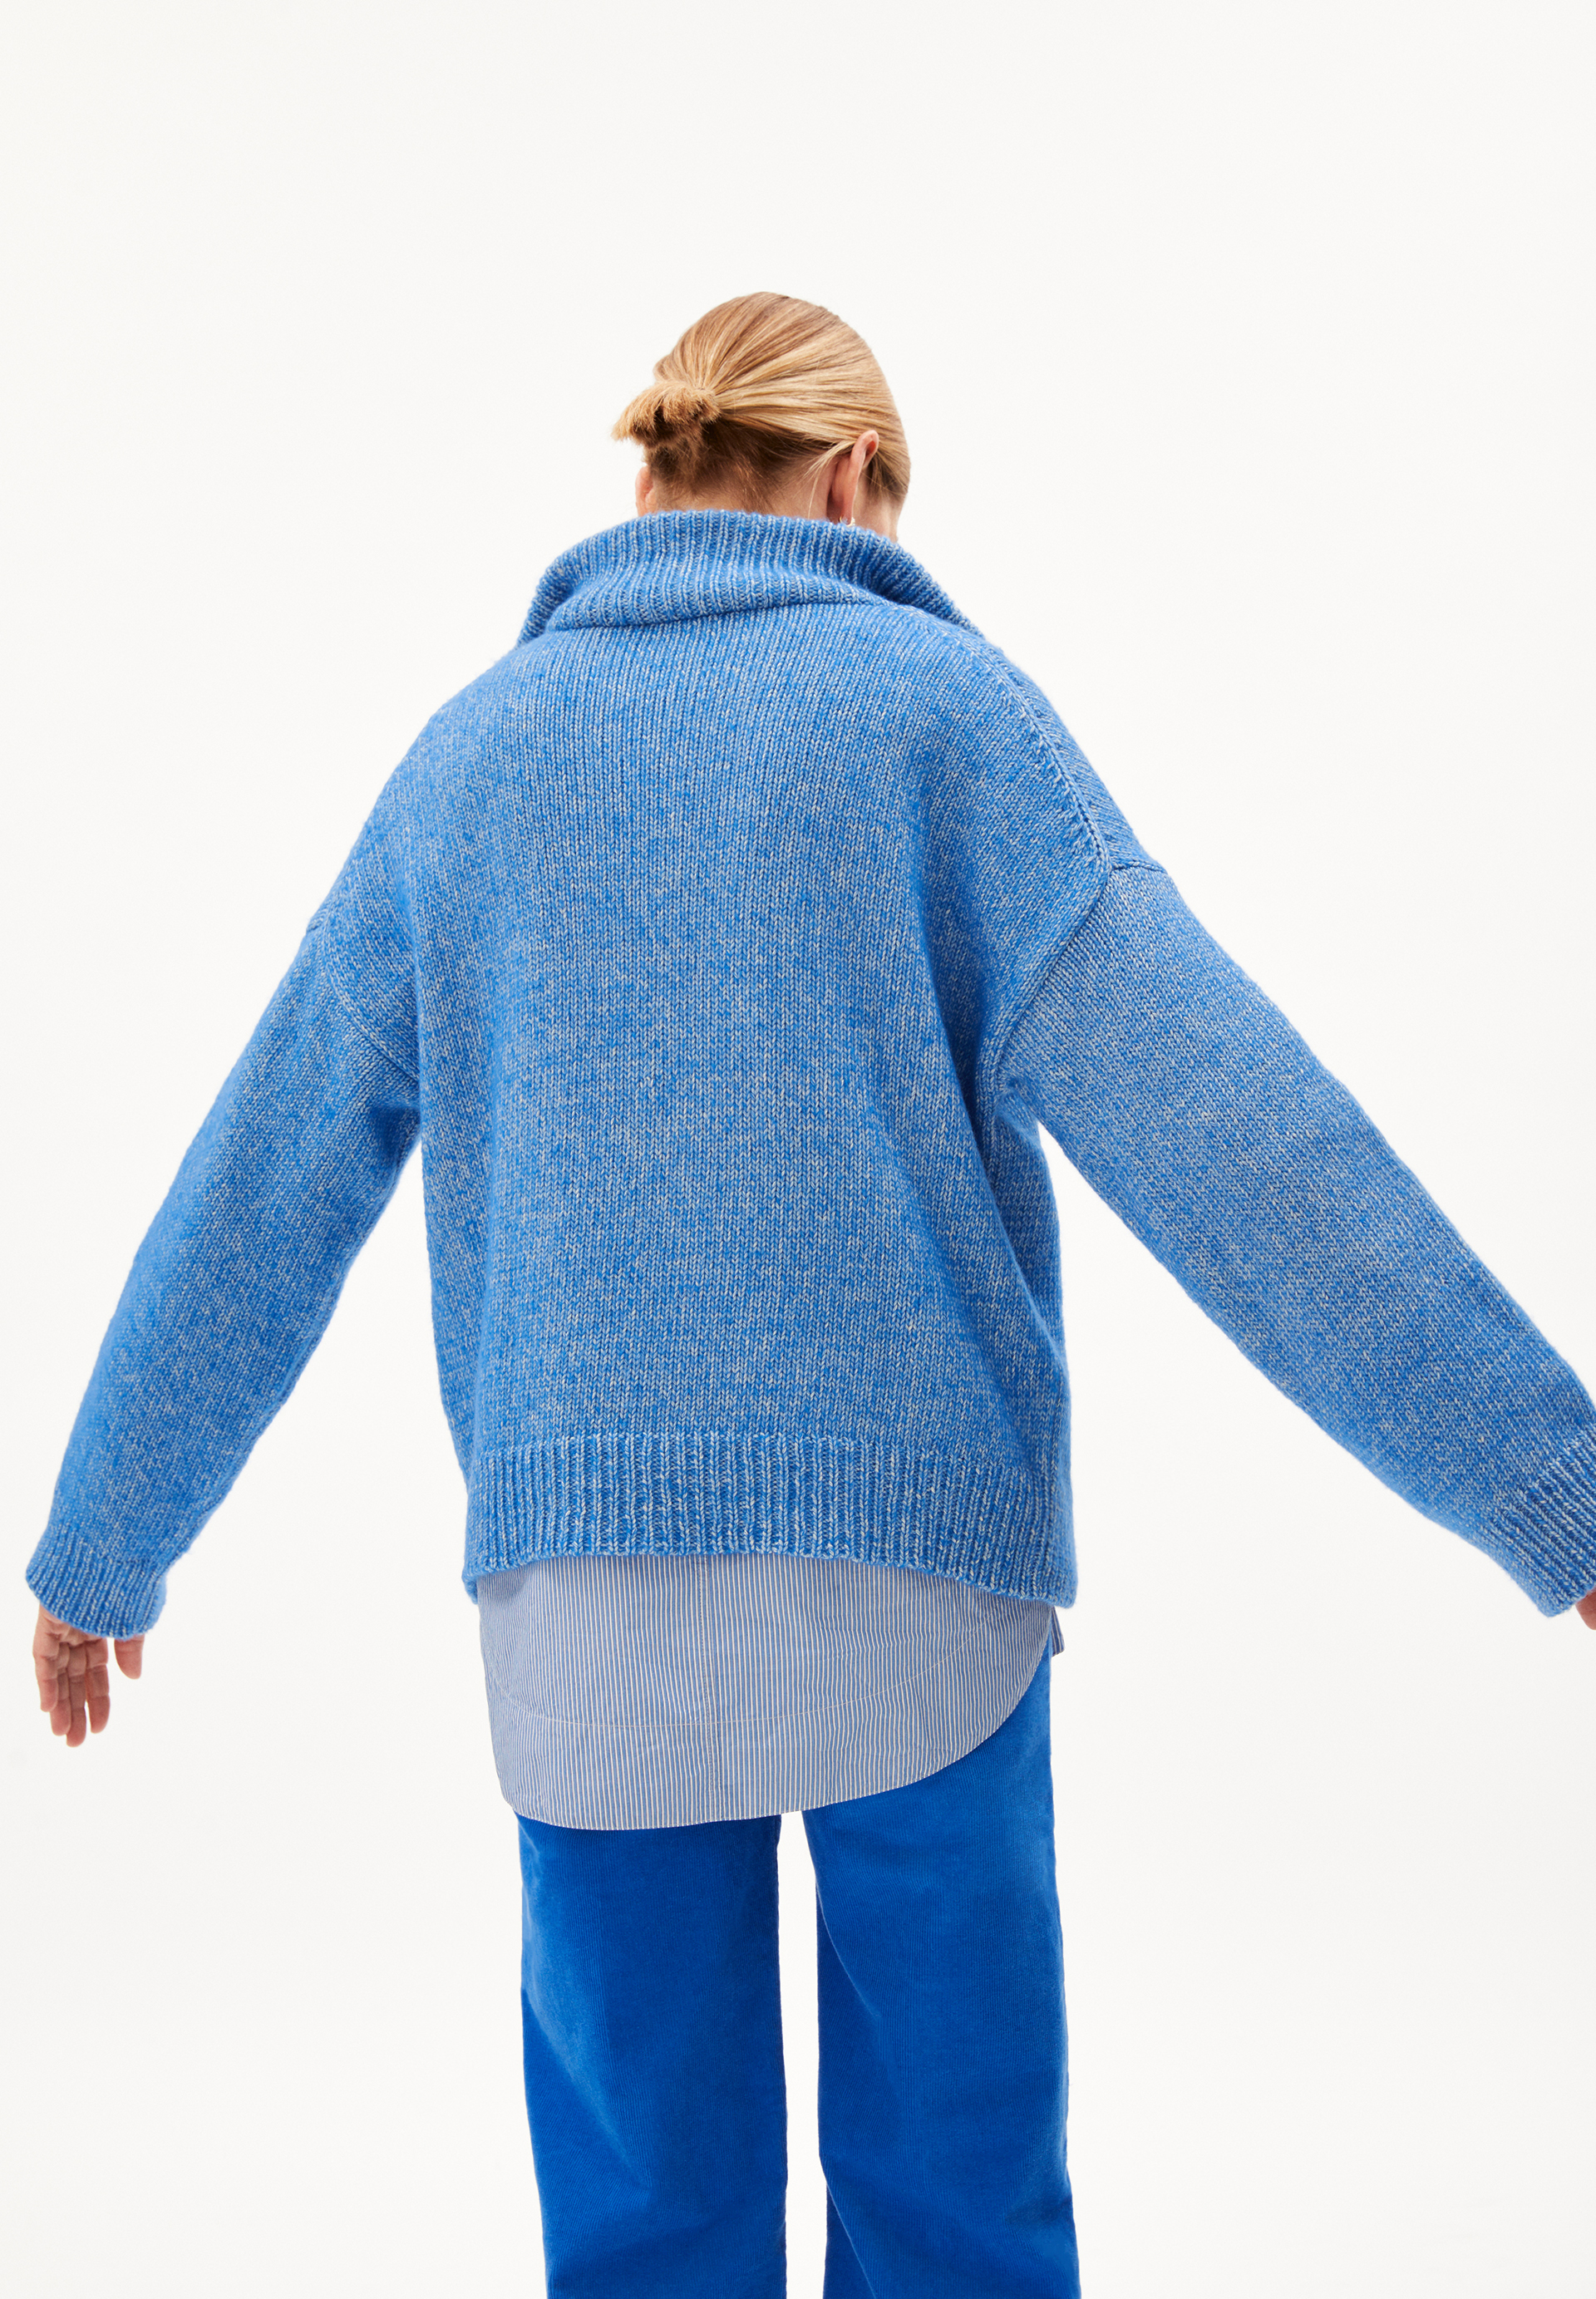 RONYAAS SOFT Sweater Loose Fit made of Organic Cotton Merino Mix